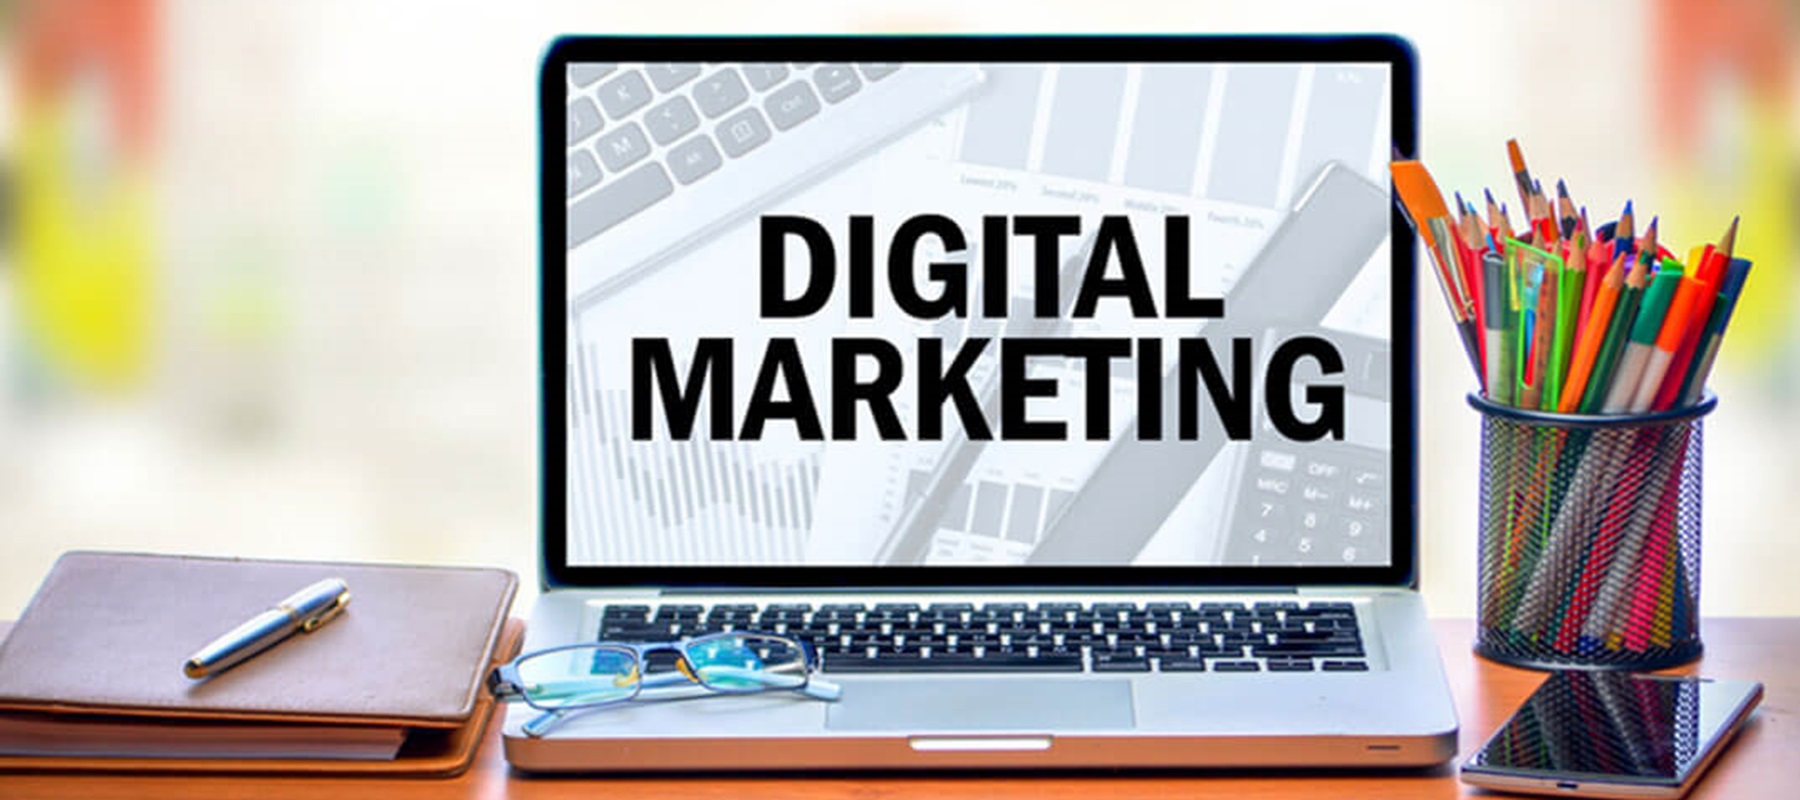 Digital marketing spending market size to grow by $323 billion between 2023 and 2027, report